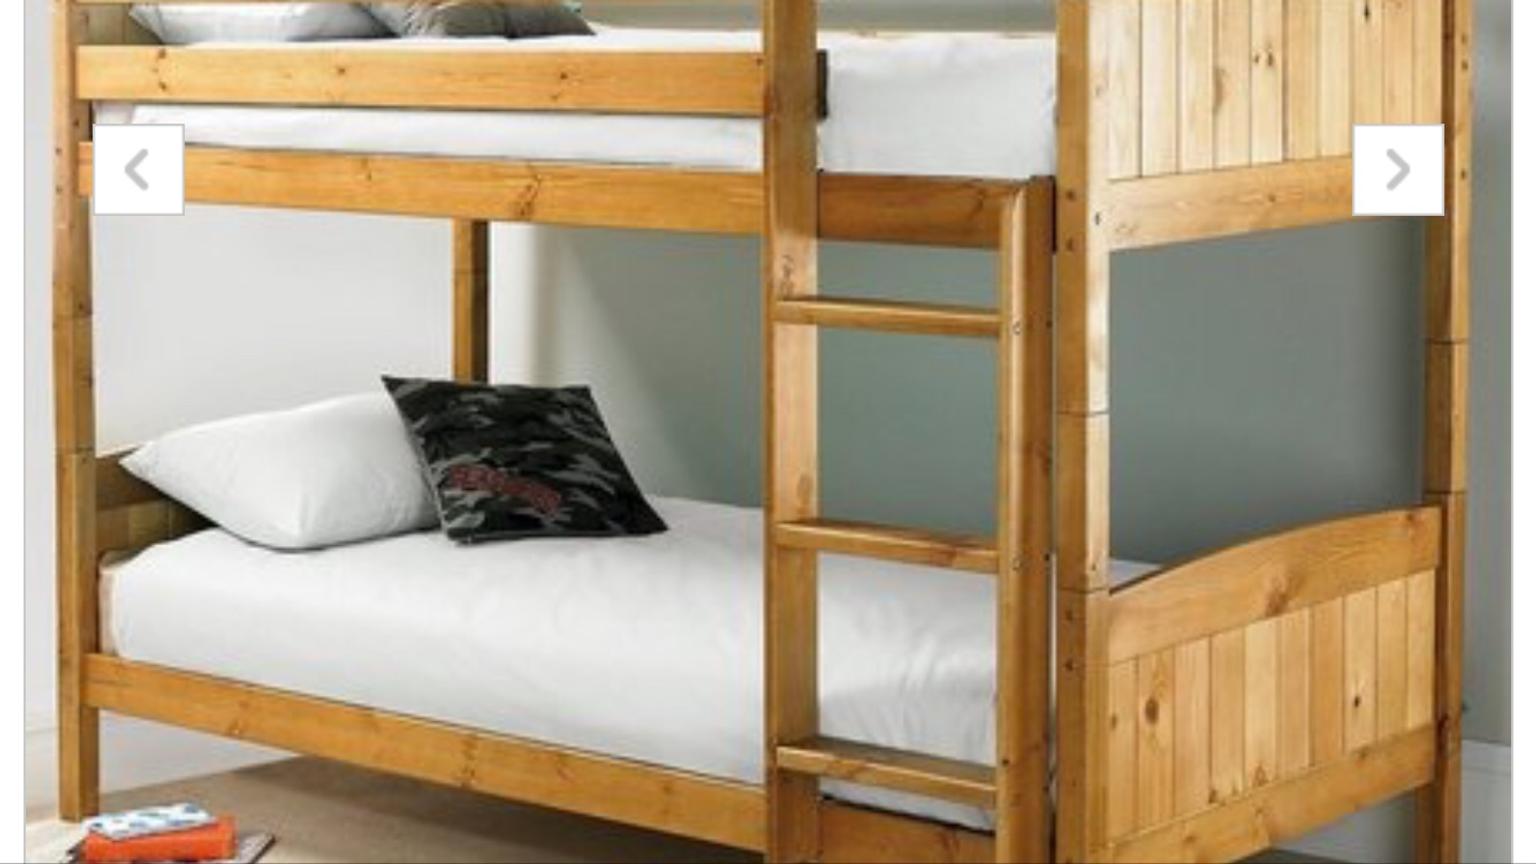 Solid Wood Bunk Beds With Mattress In, Solid Oak Bunk Beds